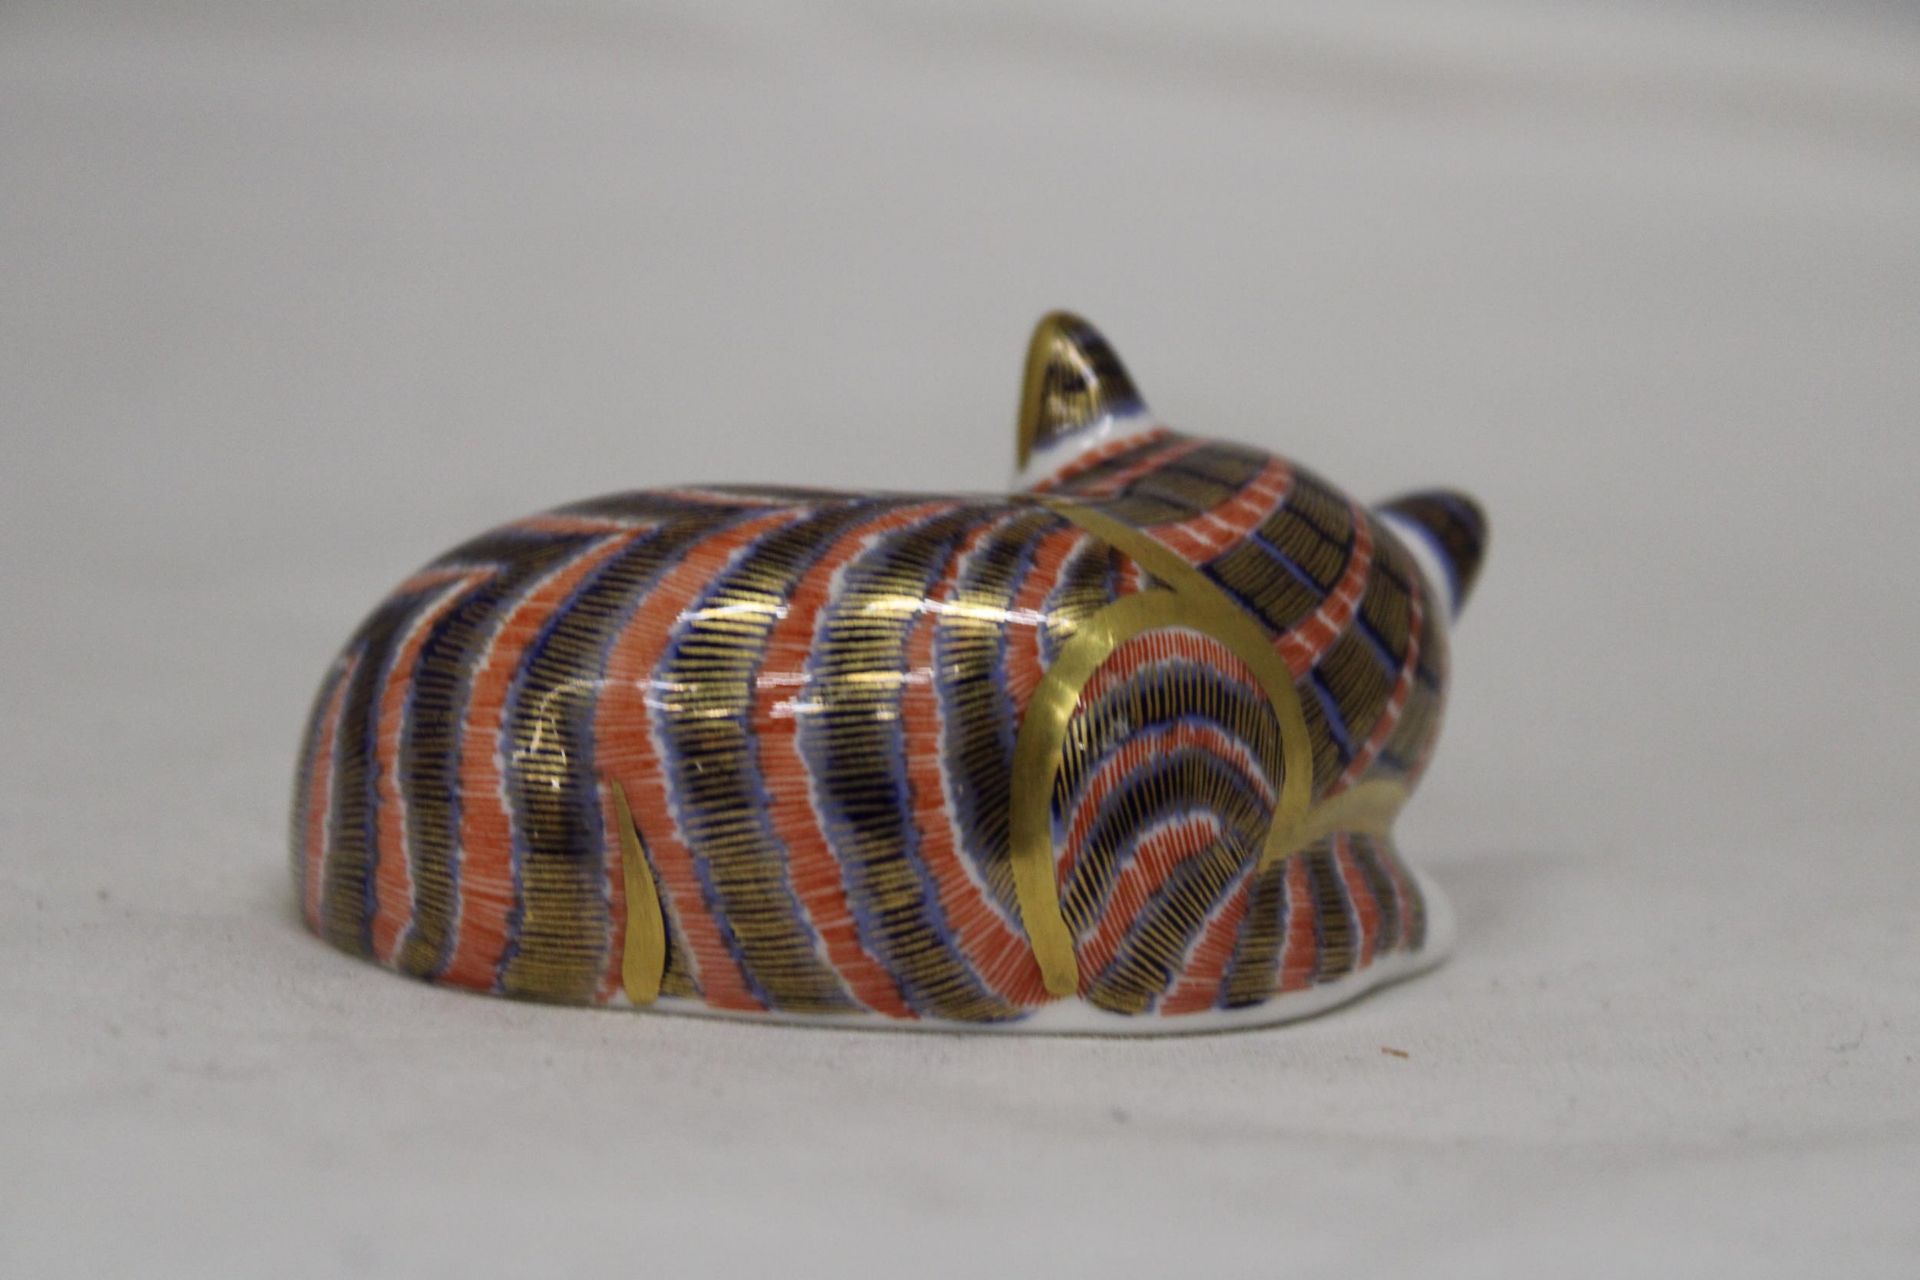 A ROYAL CROWN DERBY SLEEPING CAT (FIRSTS) - Image 4 of 6